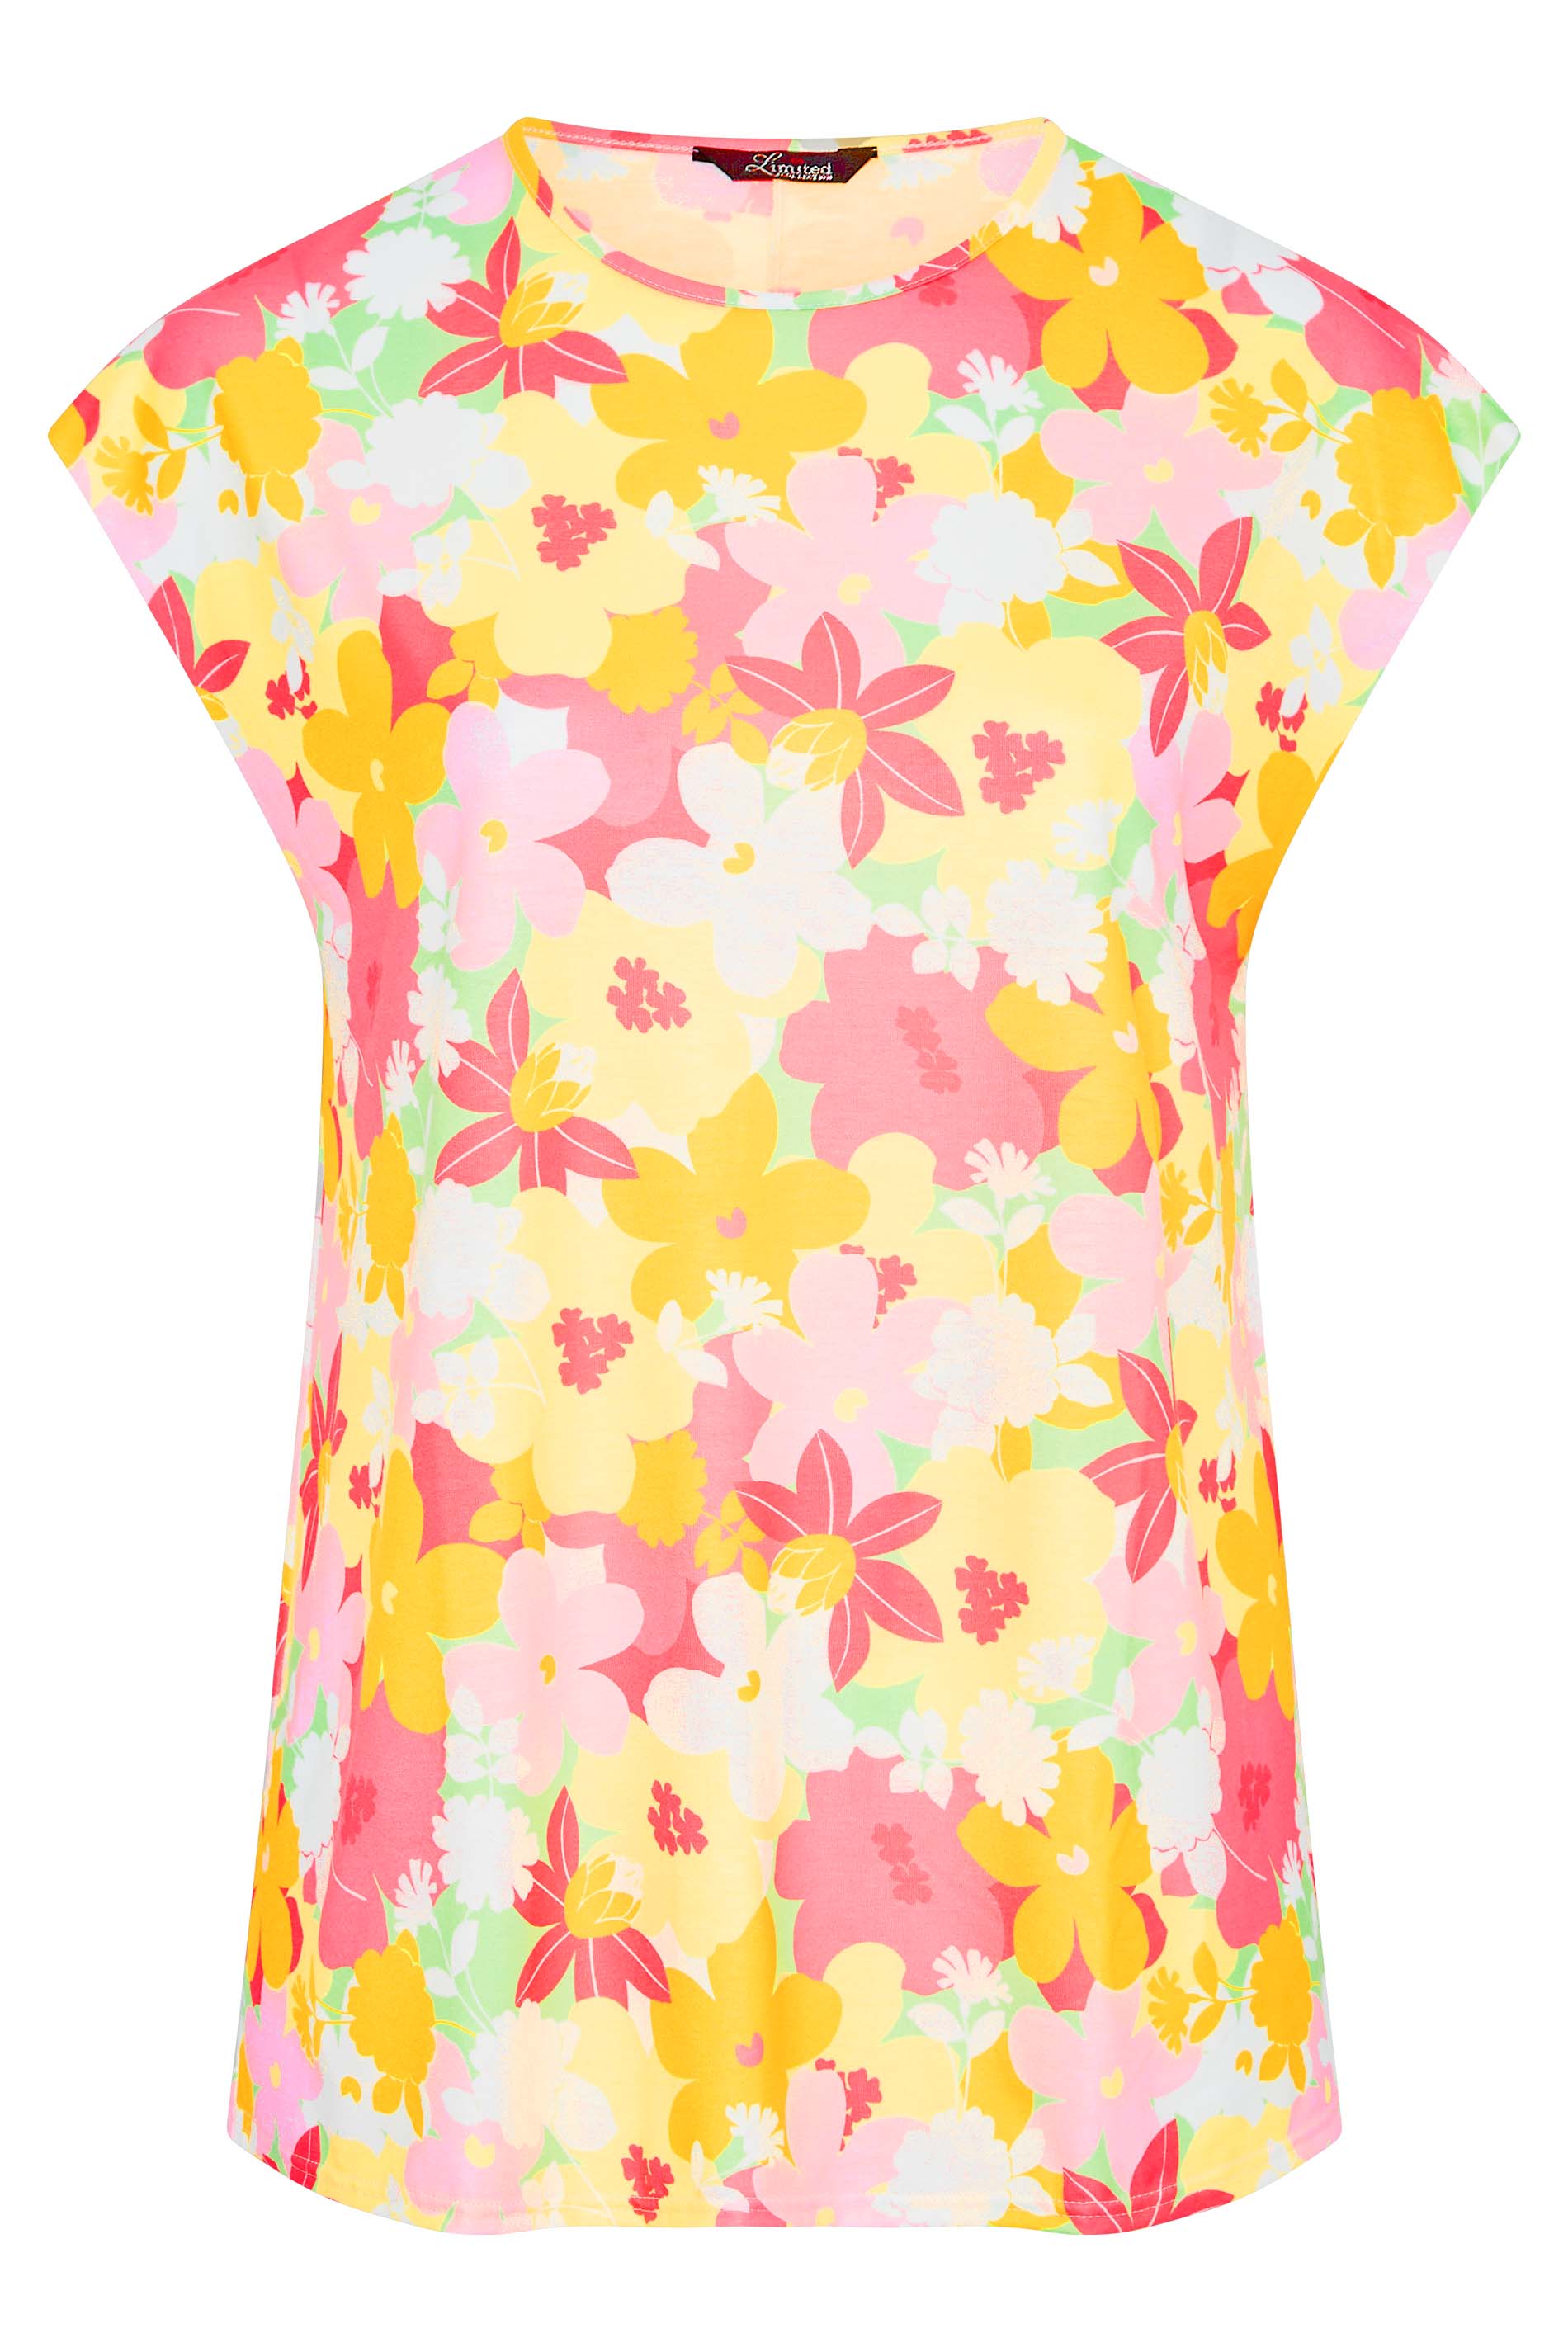 Grande taille  Tops Grande taille  Tops Jersey | LIMITED COLLECTION - T-Shirt Rétro Rose en Floral - PQ10765